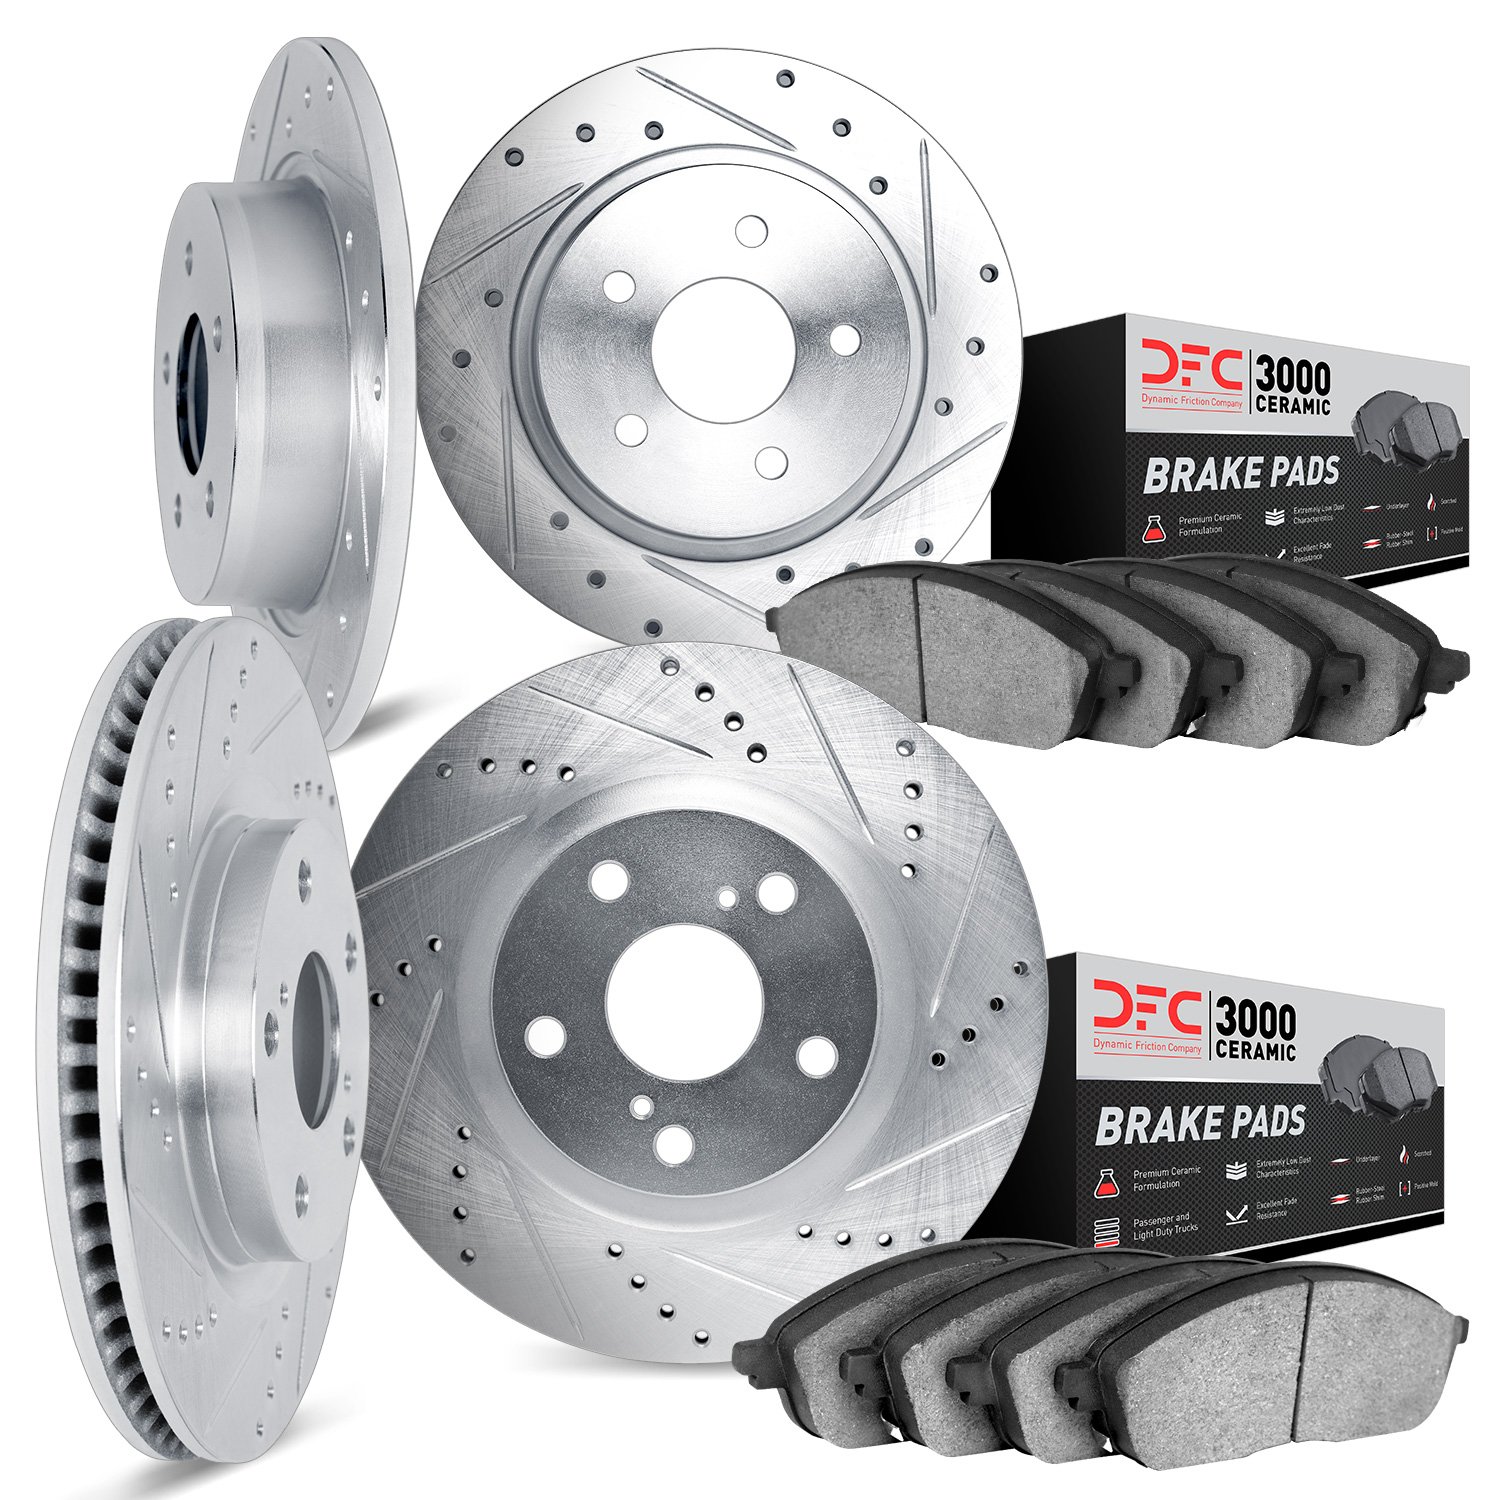 7304-54103 Drilled/Slotted Brake Rotor with 3000-Series Ceramic Brake Pads Kit [Silver], 2013-2020 Ford/Lincoln/Mercury/Mazda, P